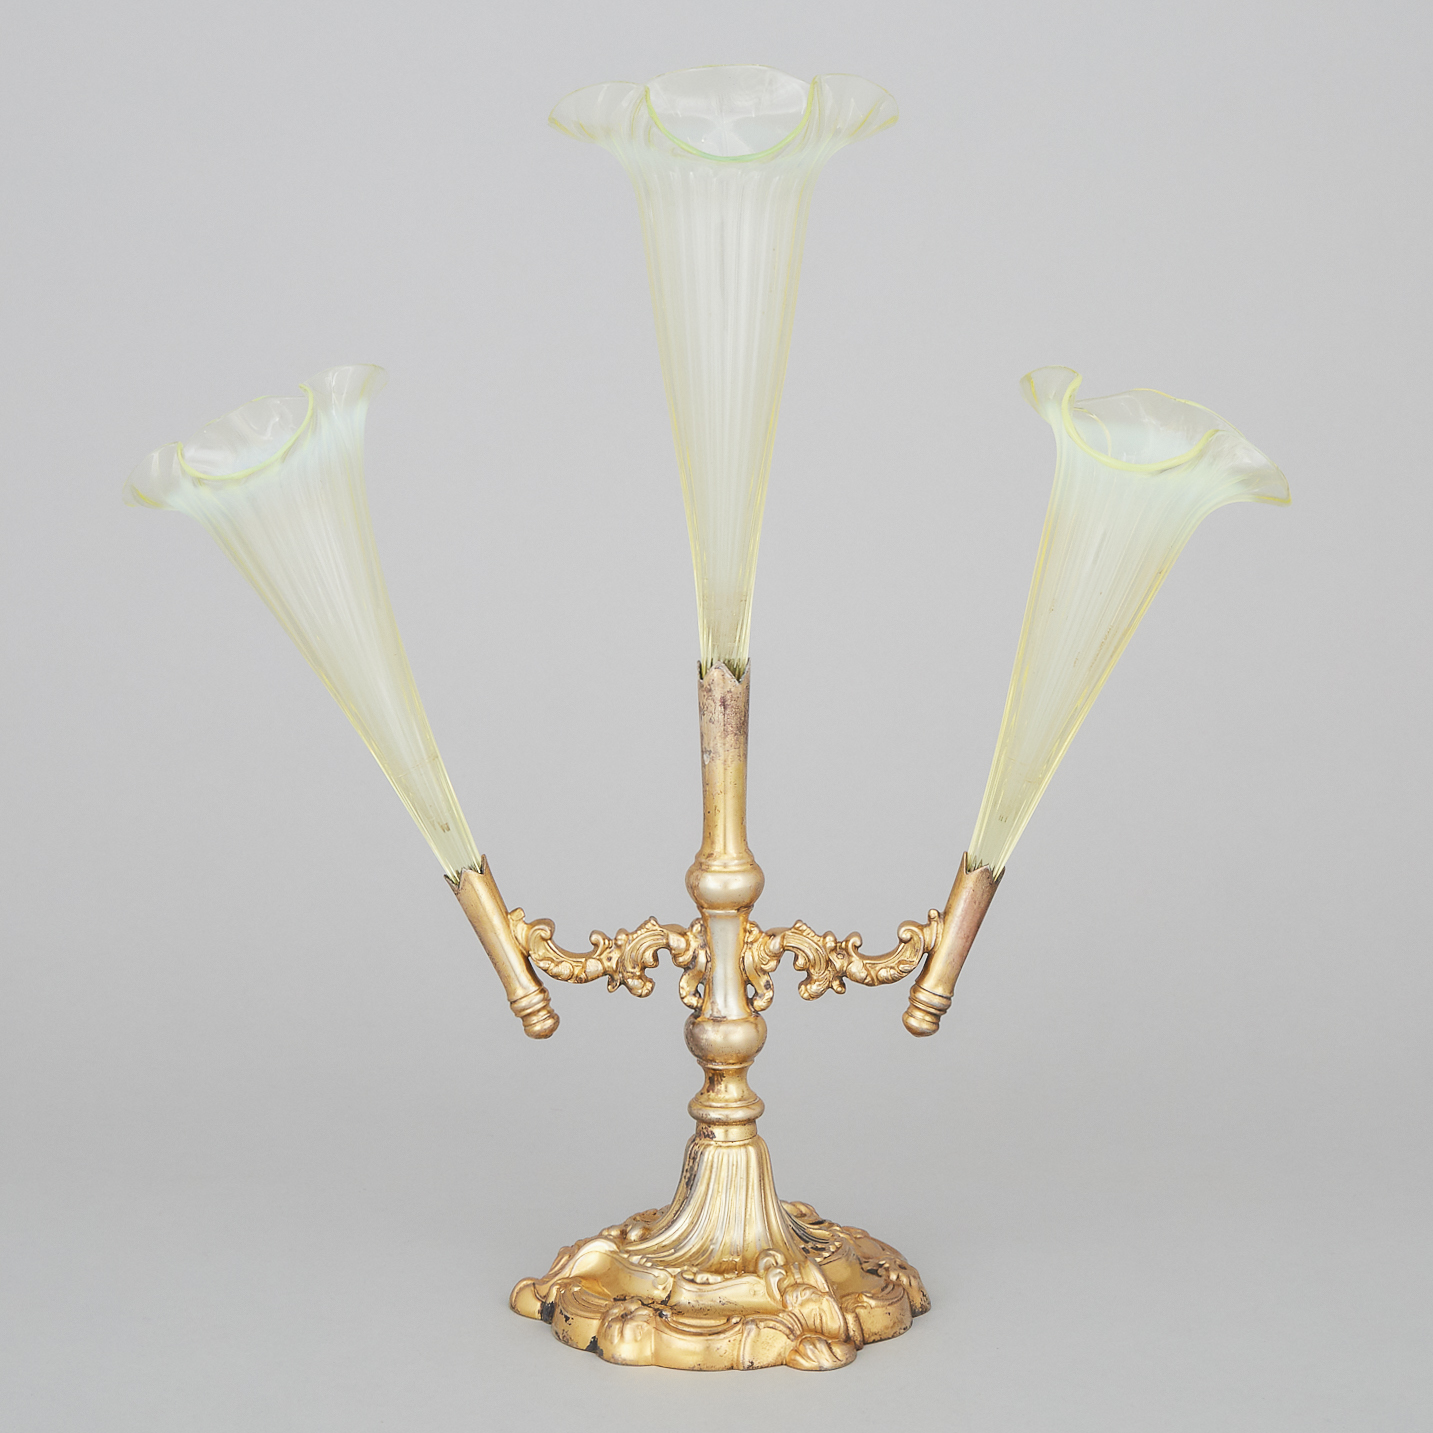 English Silver-Gilt Plated and Vaseline Glass Epergne, Walker & Hall, early 20th century